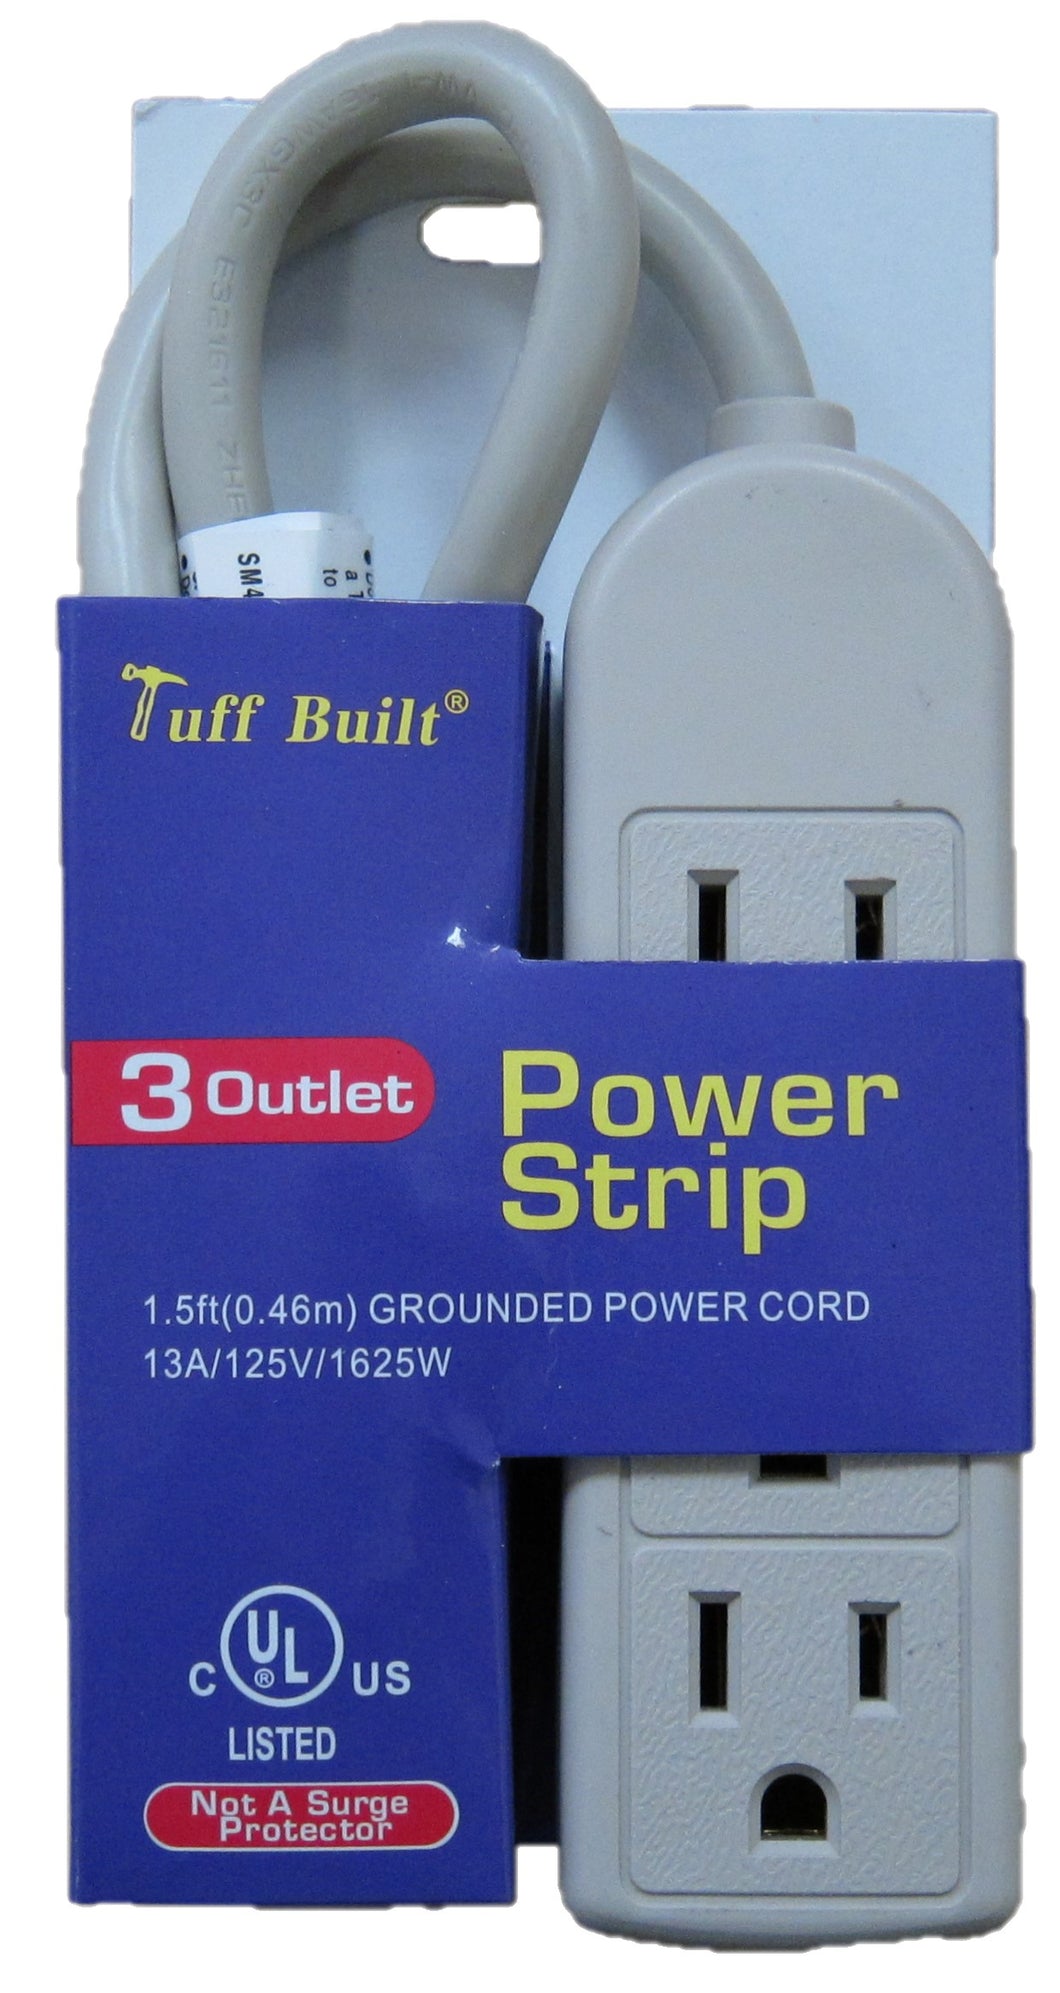 Power Strip 1.5' Cord, 3 Outlet Power Tap 16 Gauge Wire, 13 Amp